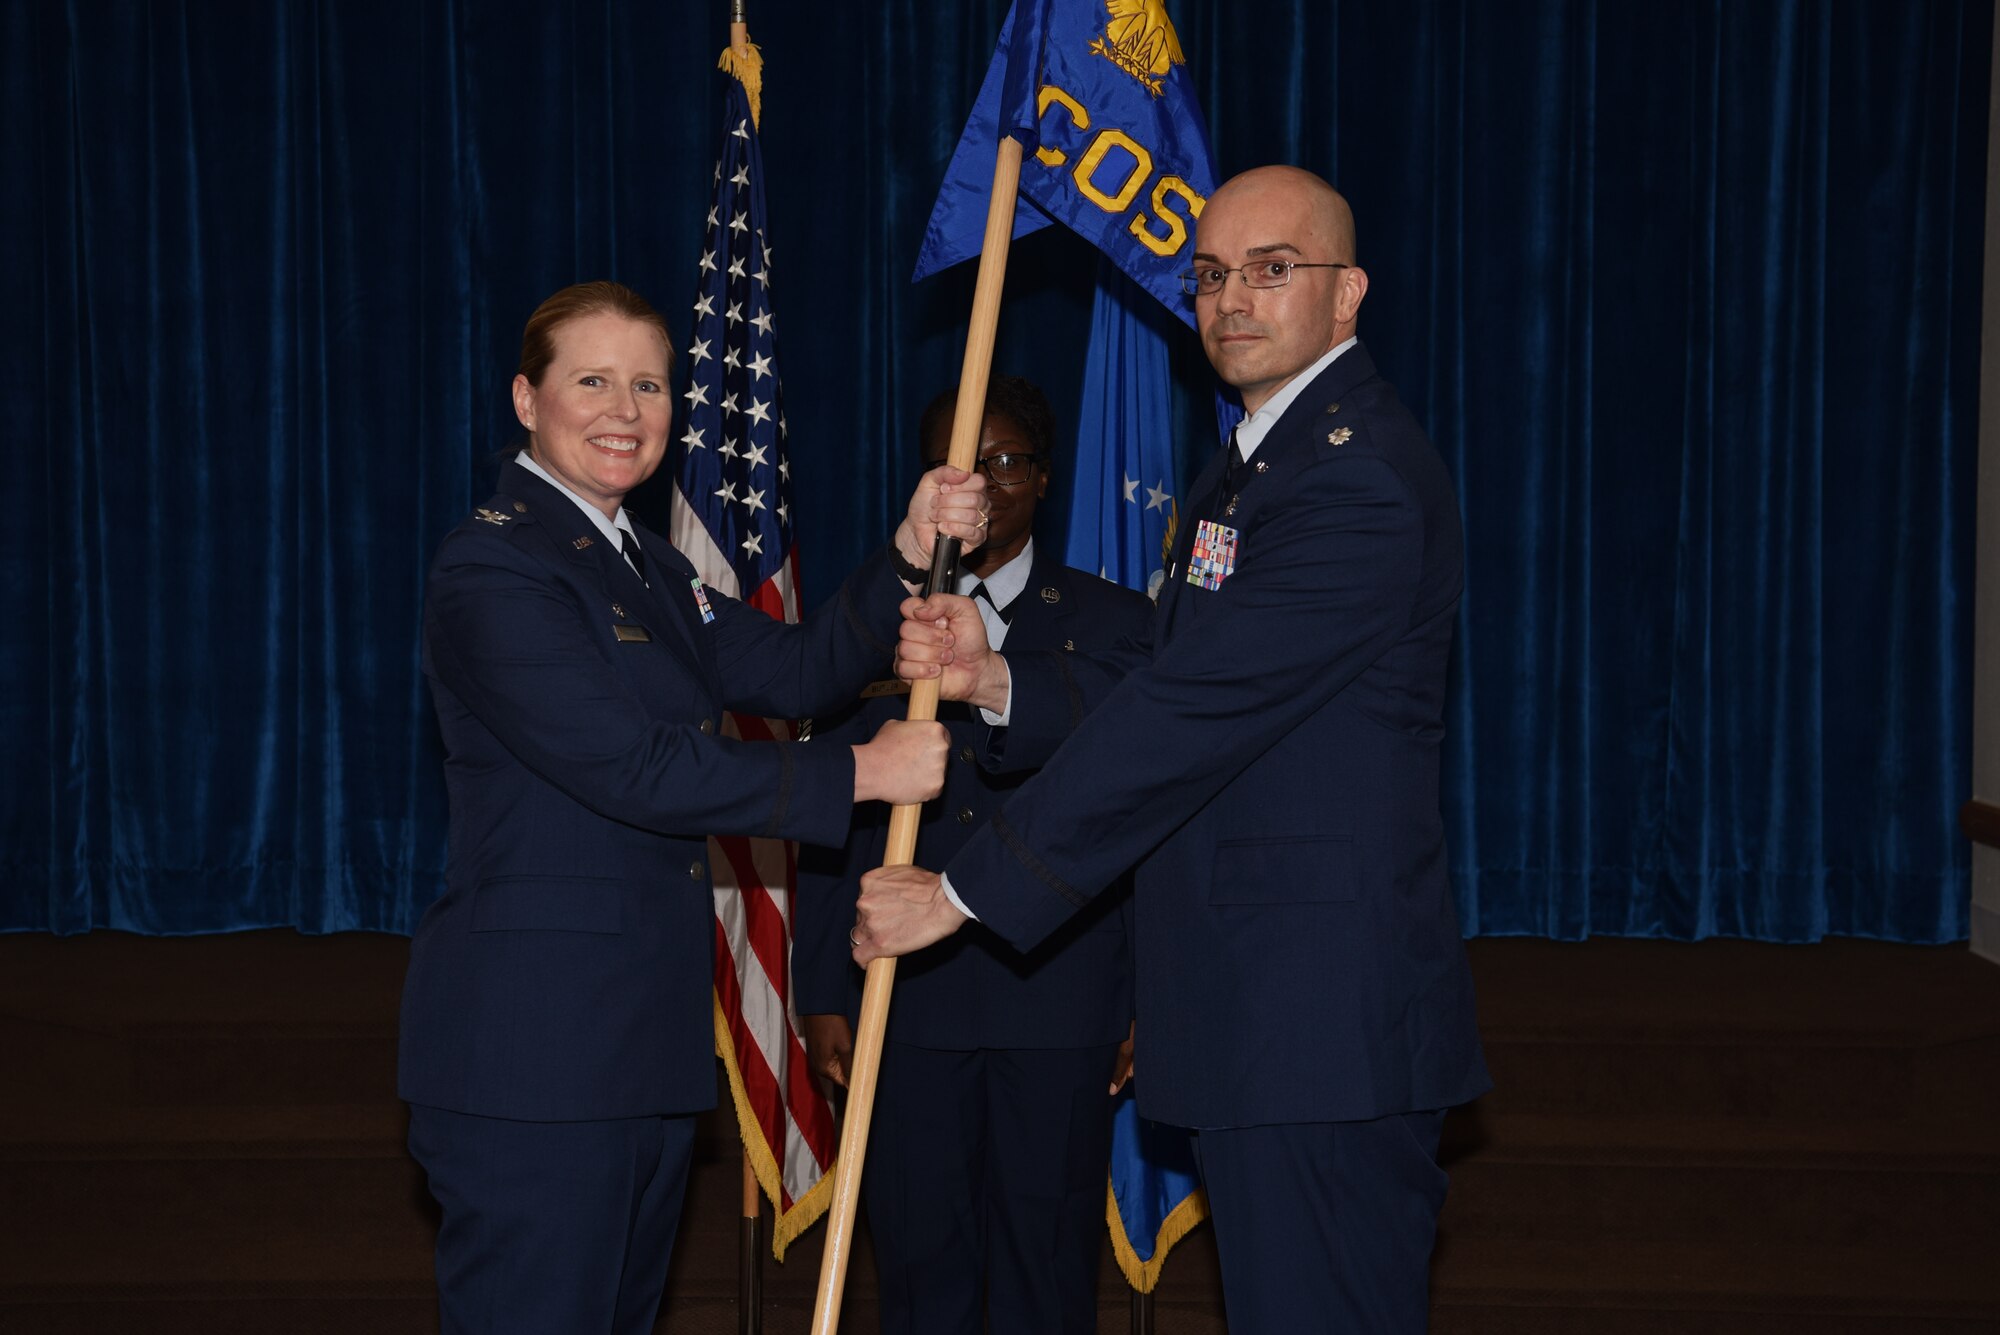 Lieutenant Col. David Barker took command of the 90th Healthcare Operations Squadron during a change of command ceremony June 24, 2019 on F.E. Warren Air Force Base, Wyo.